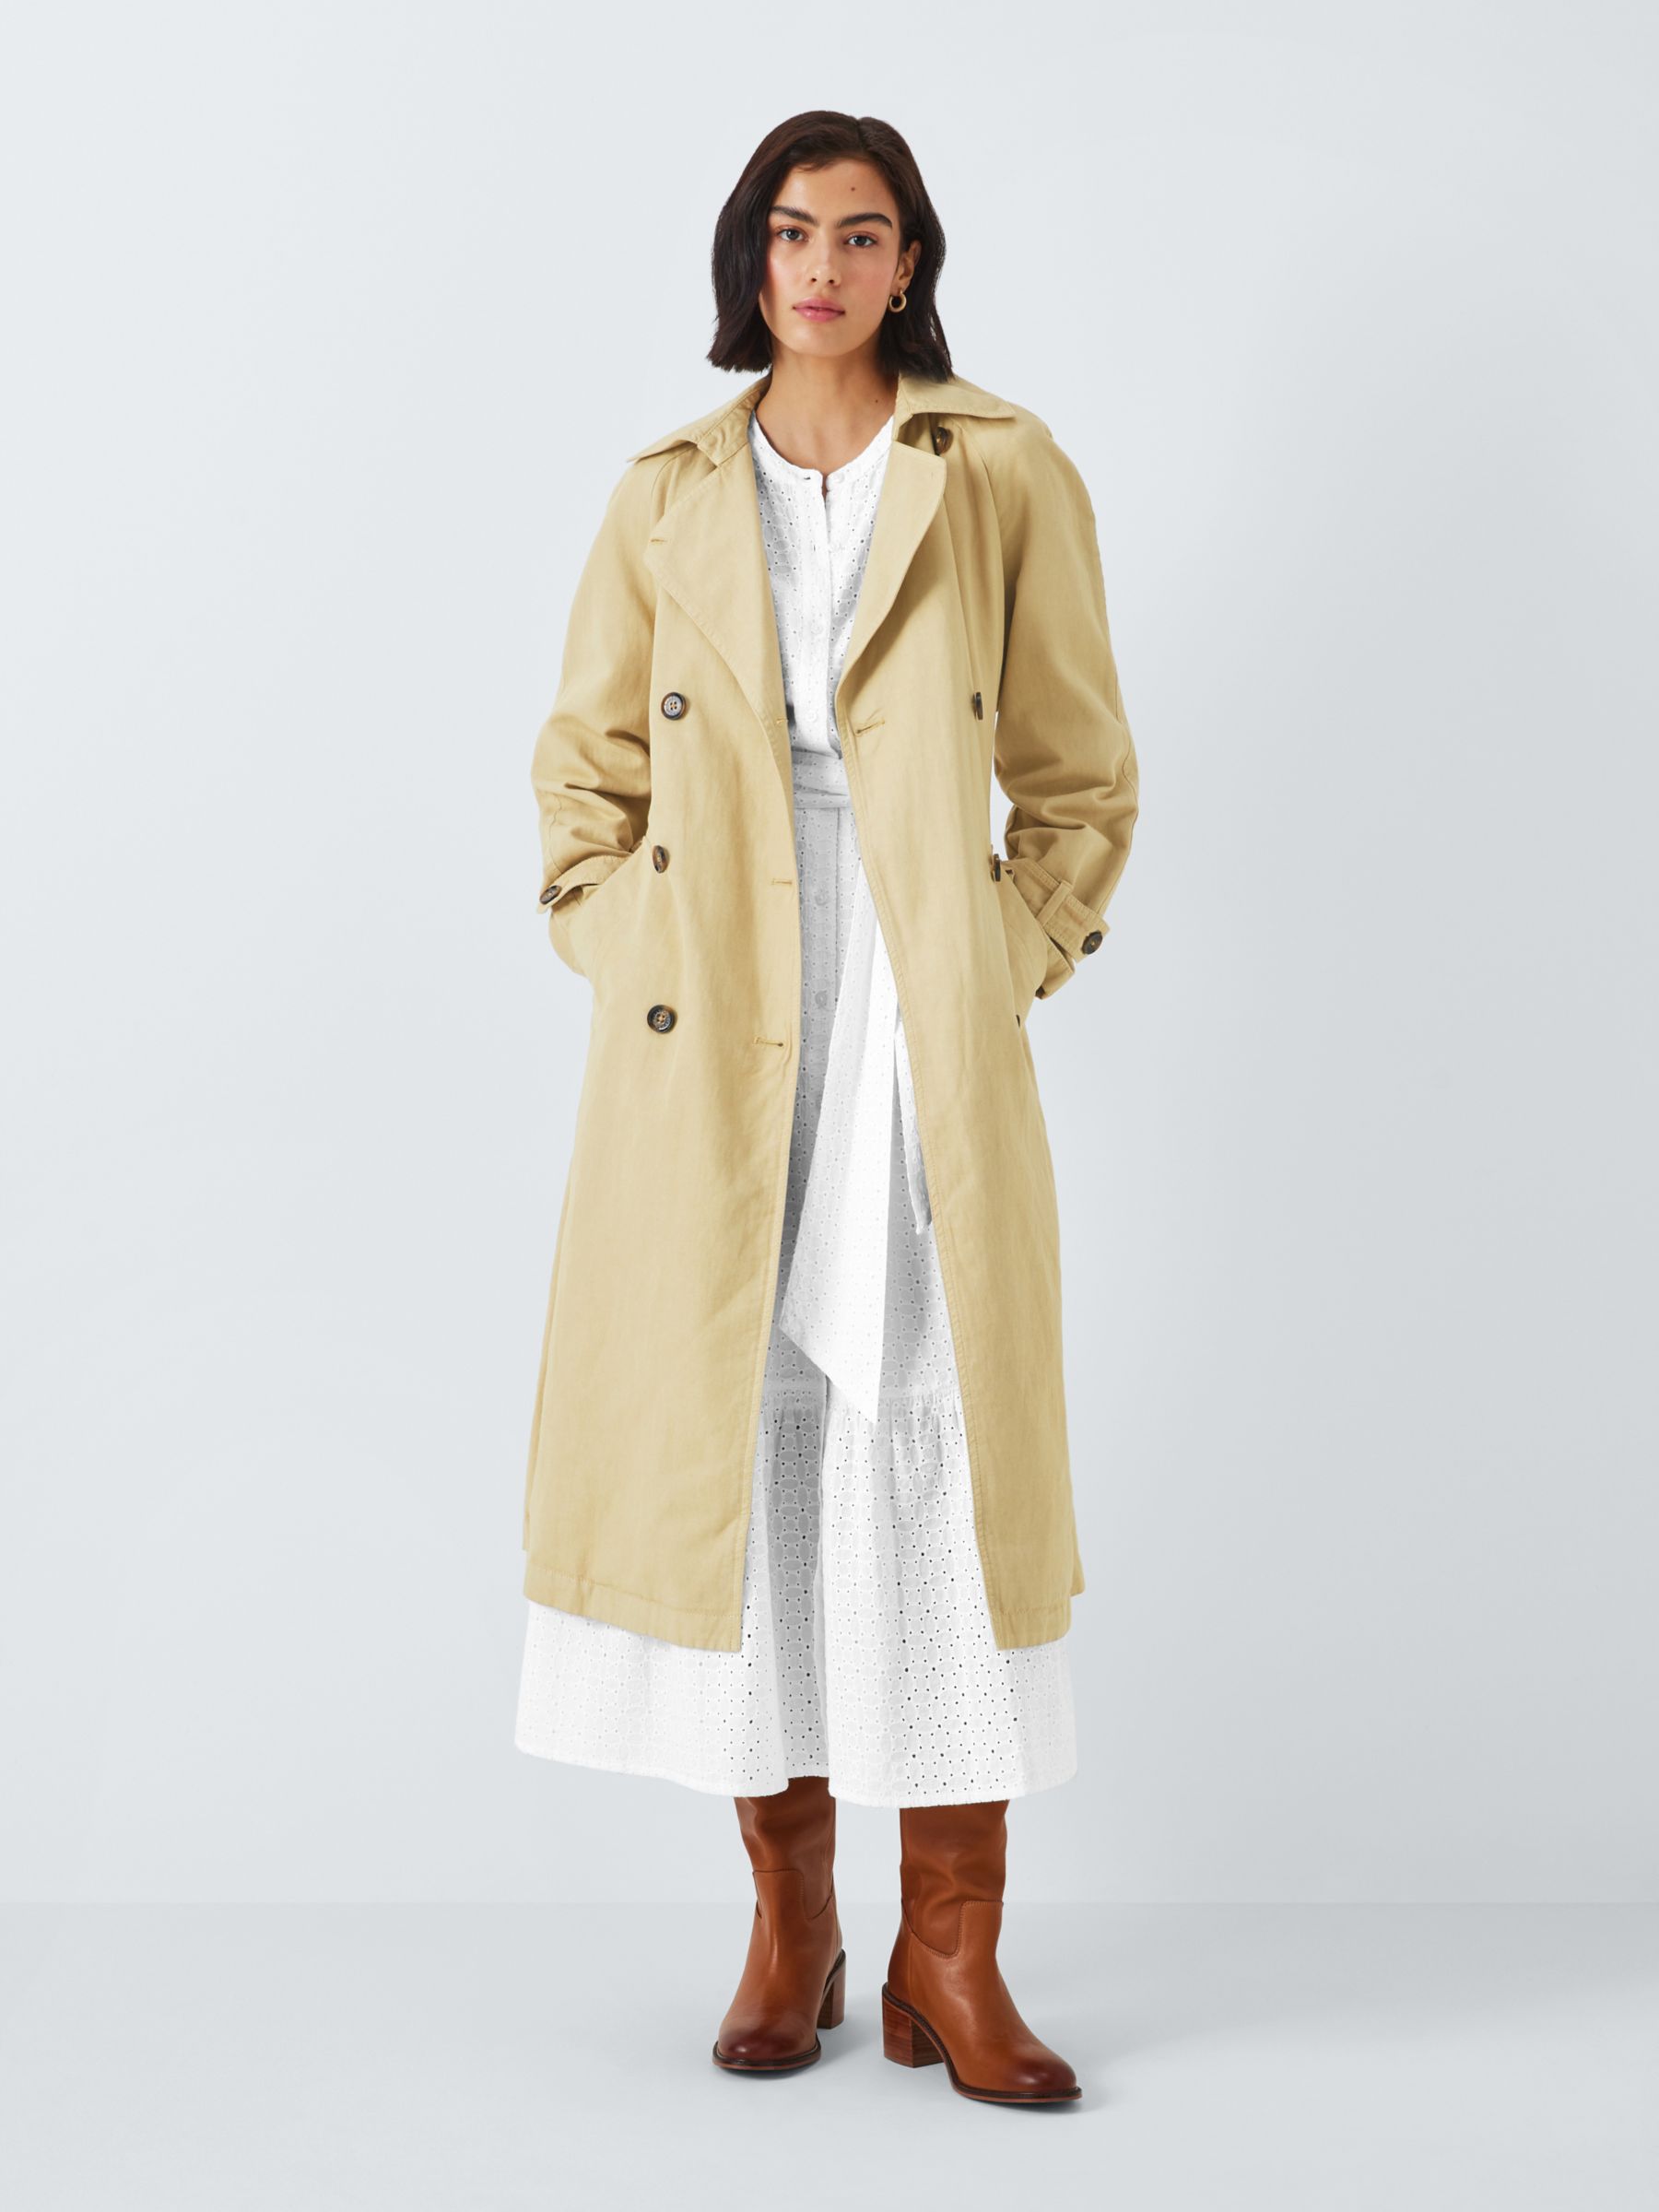 Barbour Tomorrow's Archive Piper Maxi Shirt Dress, White, 8